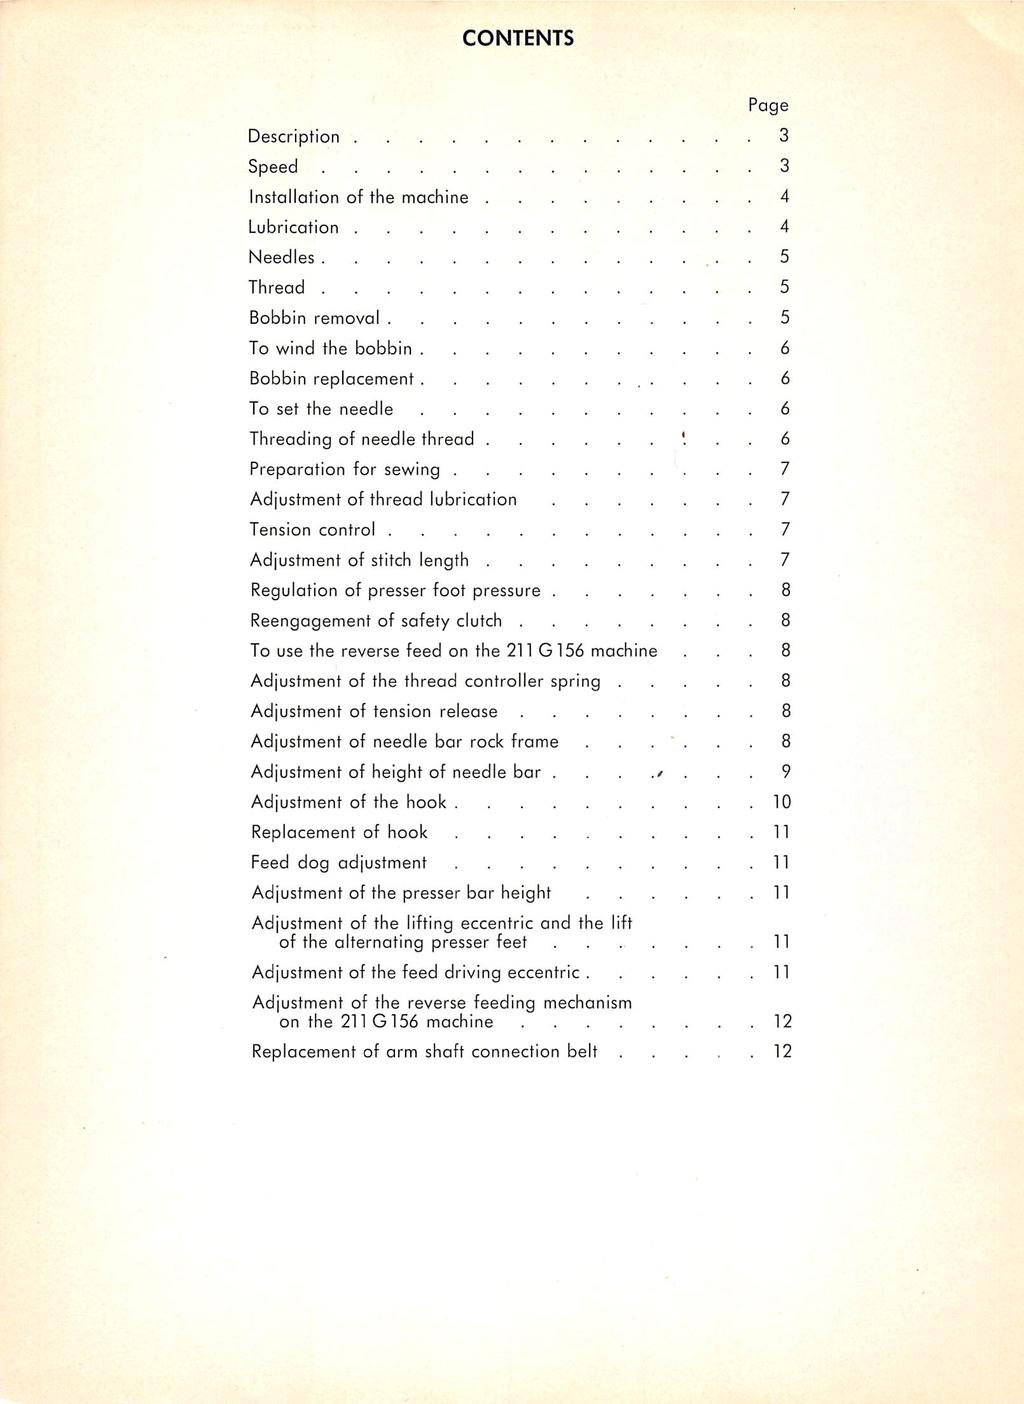 CONTENTS Page Description 3 Speed 3 Installation of the machine 4 Lubrication 4 Needles 5 Thread 5 Bobbin removal 5 To wind the bobbin 6 Bobbin replacement 6 To set the needle 6 Threading of needle